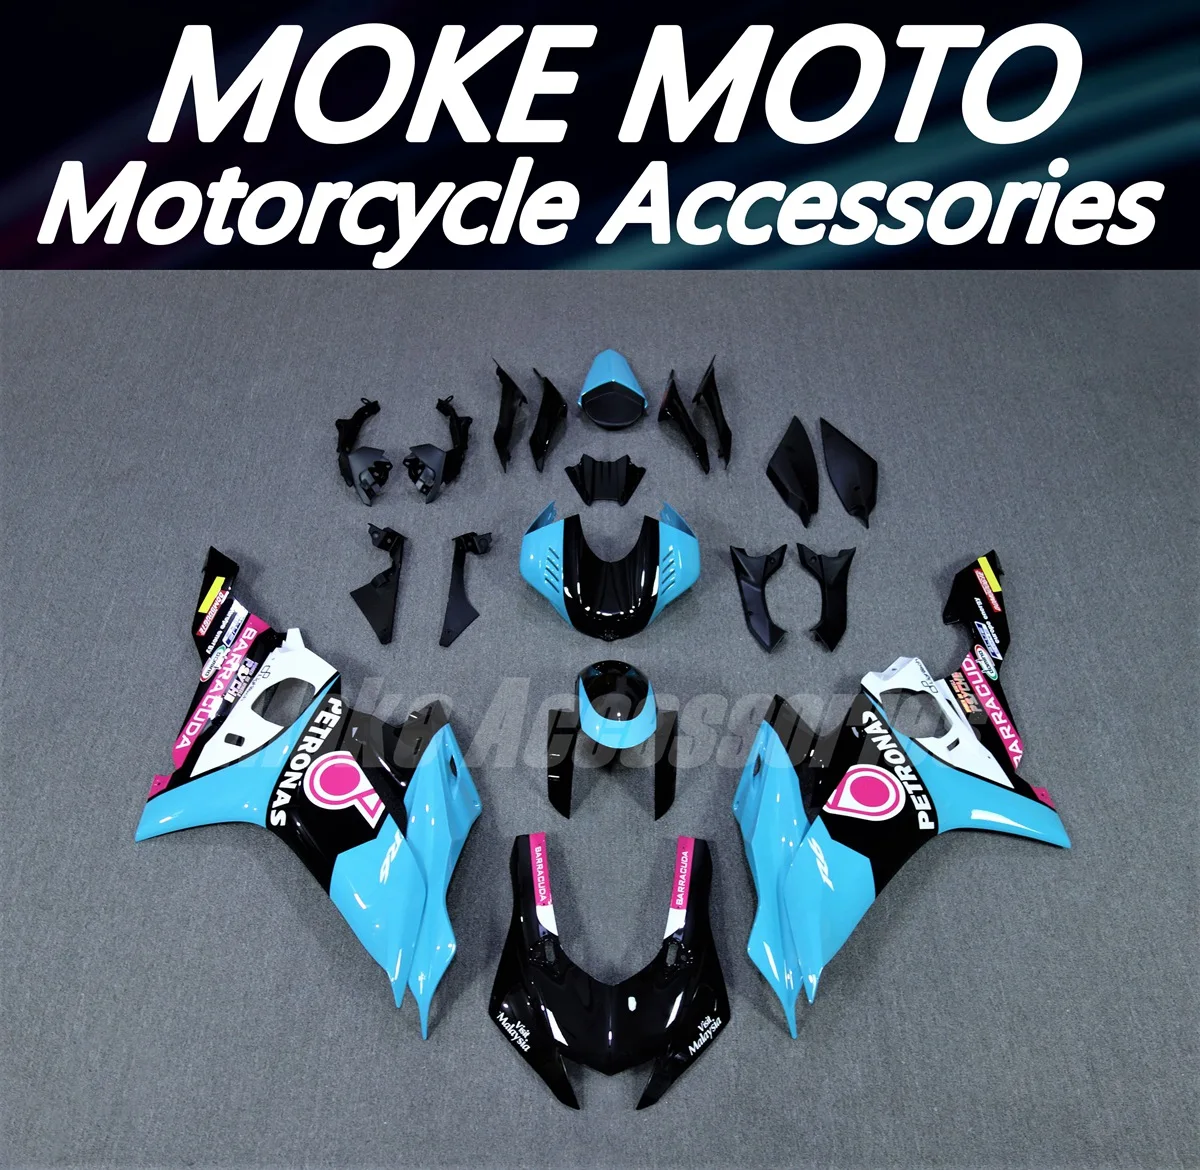 

Fairings Kit Fit For Yzf R6 2017 2018 2019 2020 2021 2022 2023 Bodywork Set High Quality Abs Injection New Blue pink Black